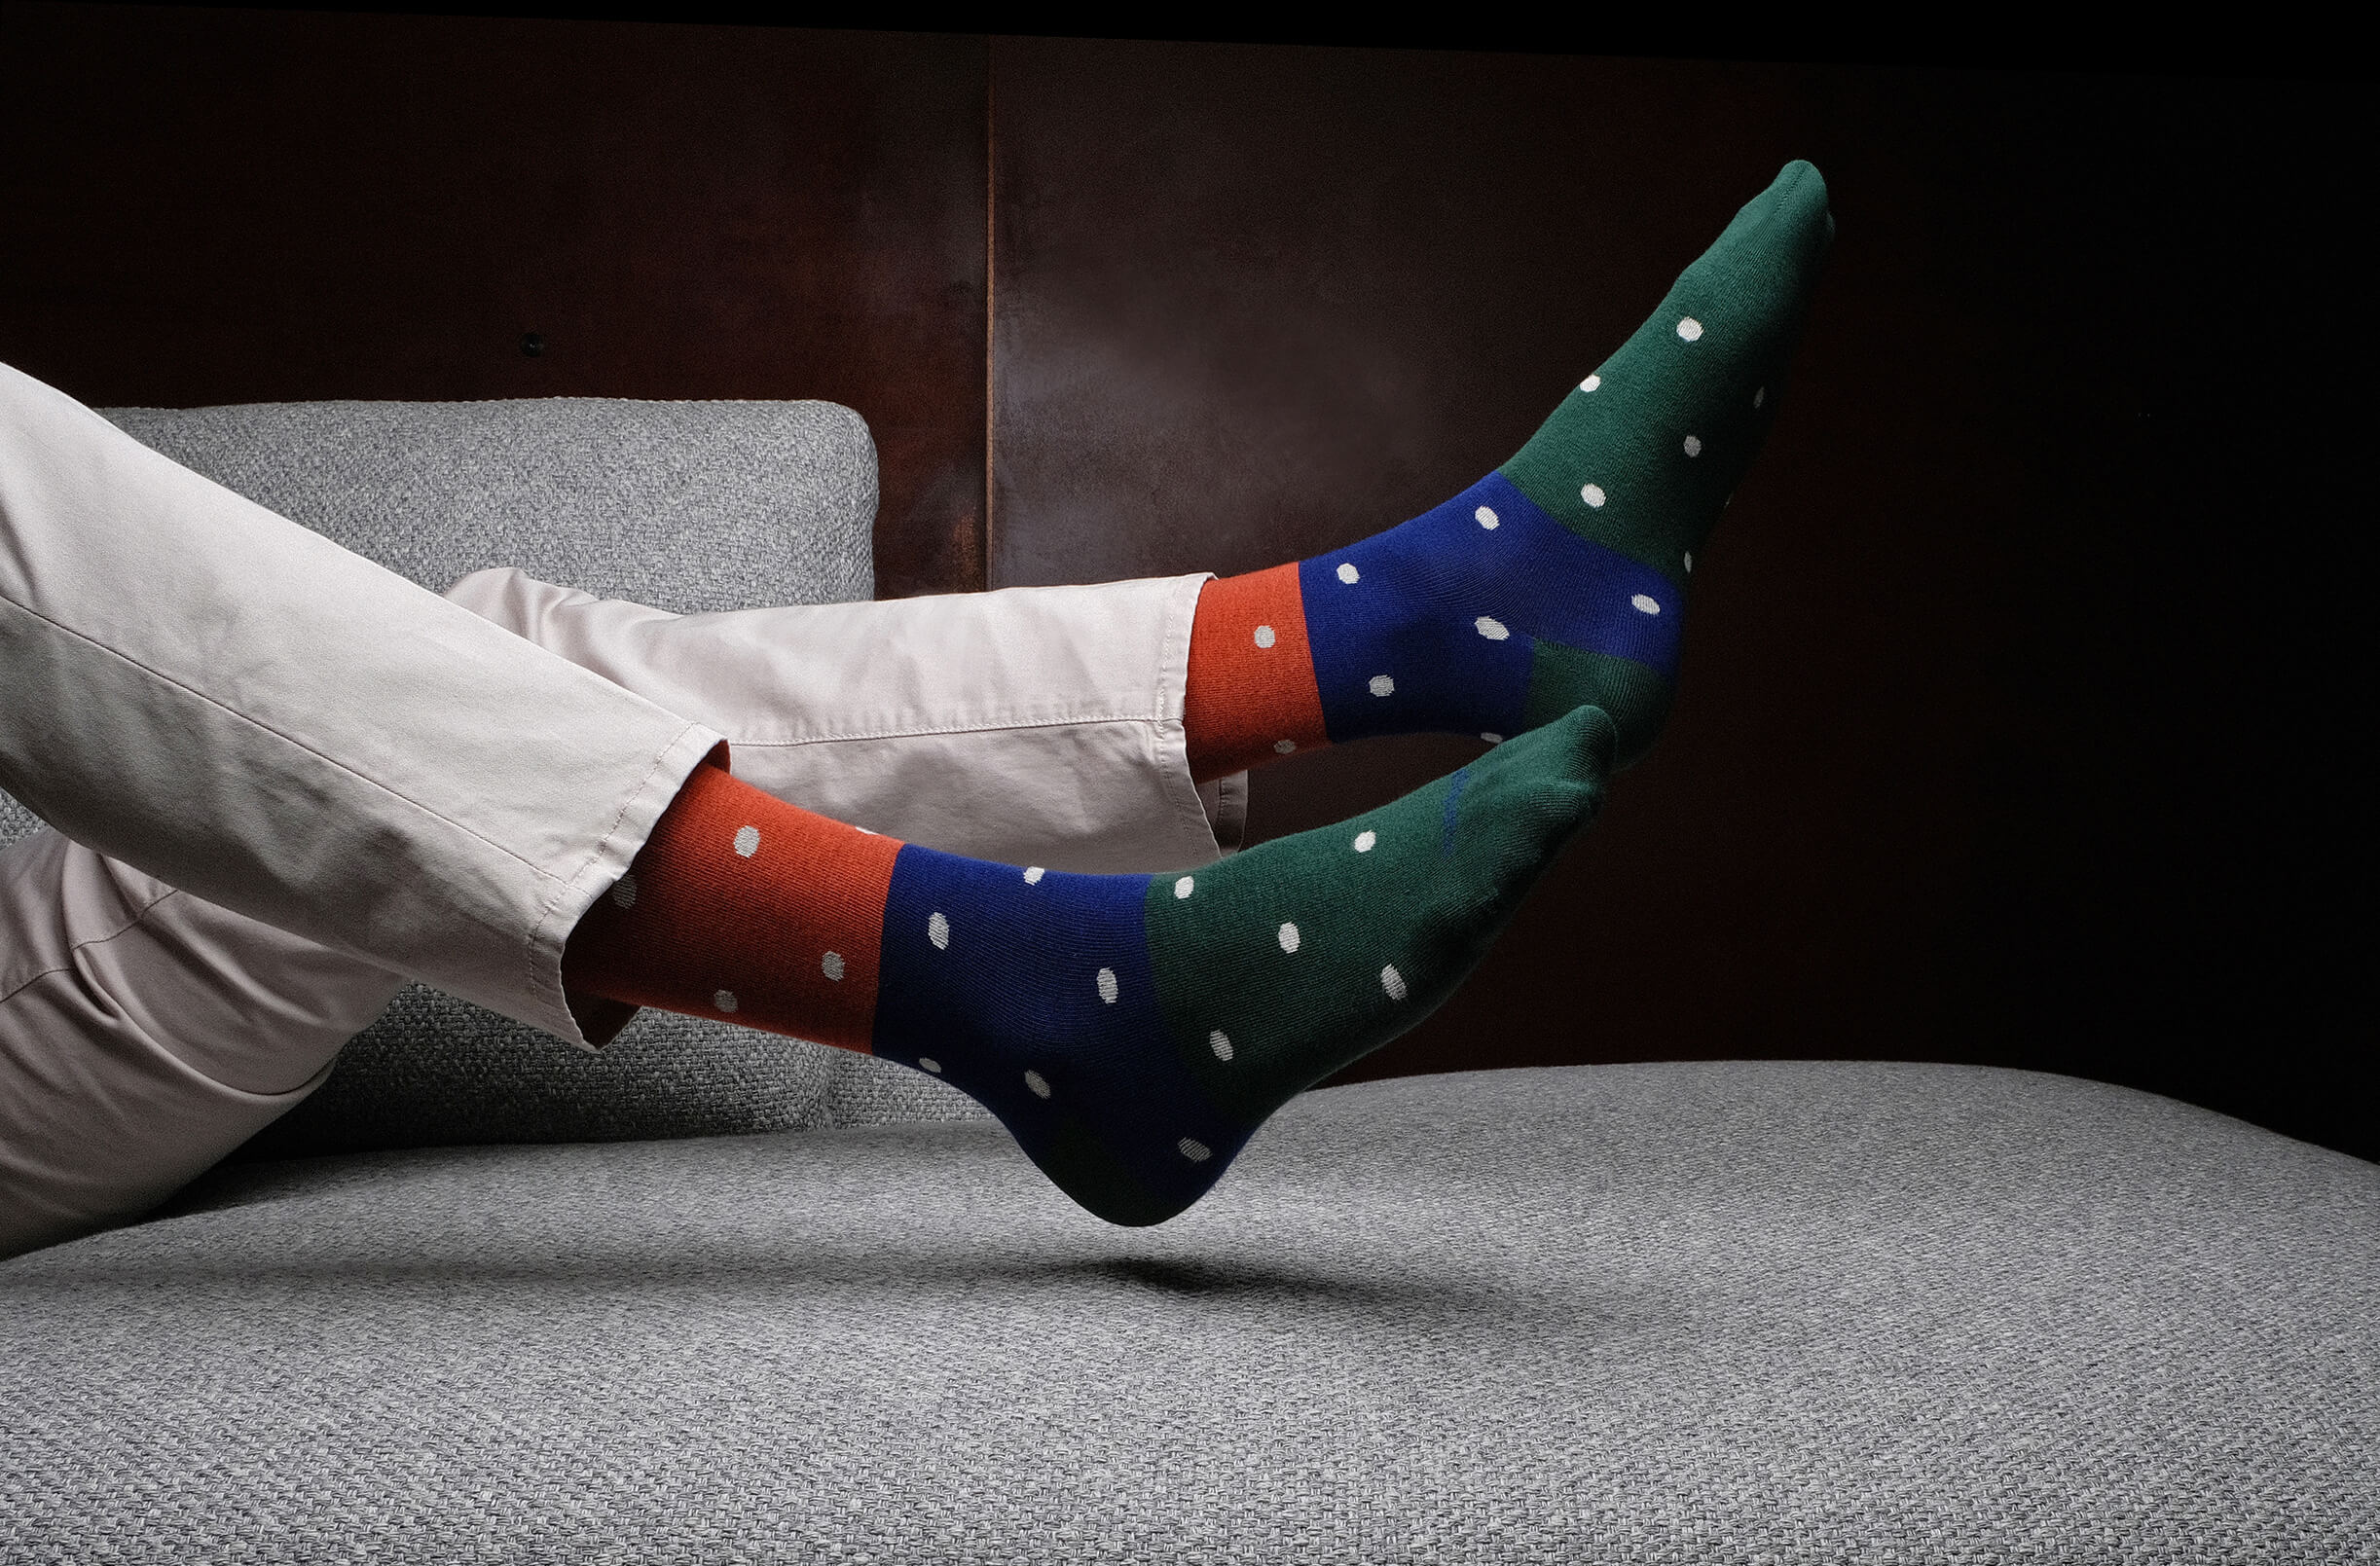 Men's Fashion Socks – Tri Polka Dots by Etiquette Clothiers, Made in Italy